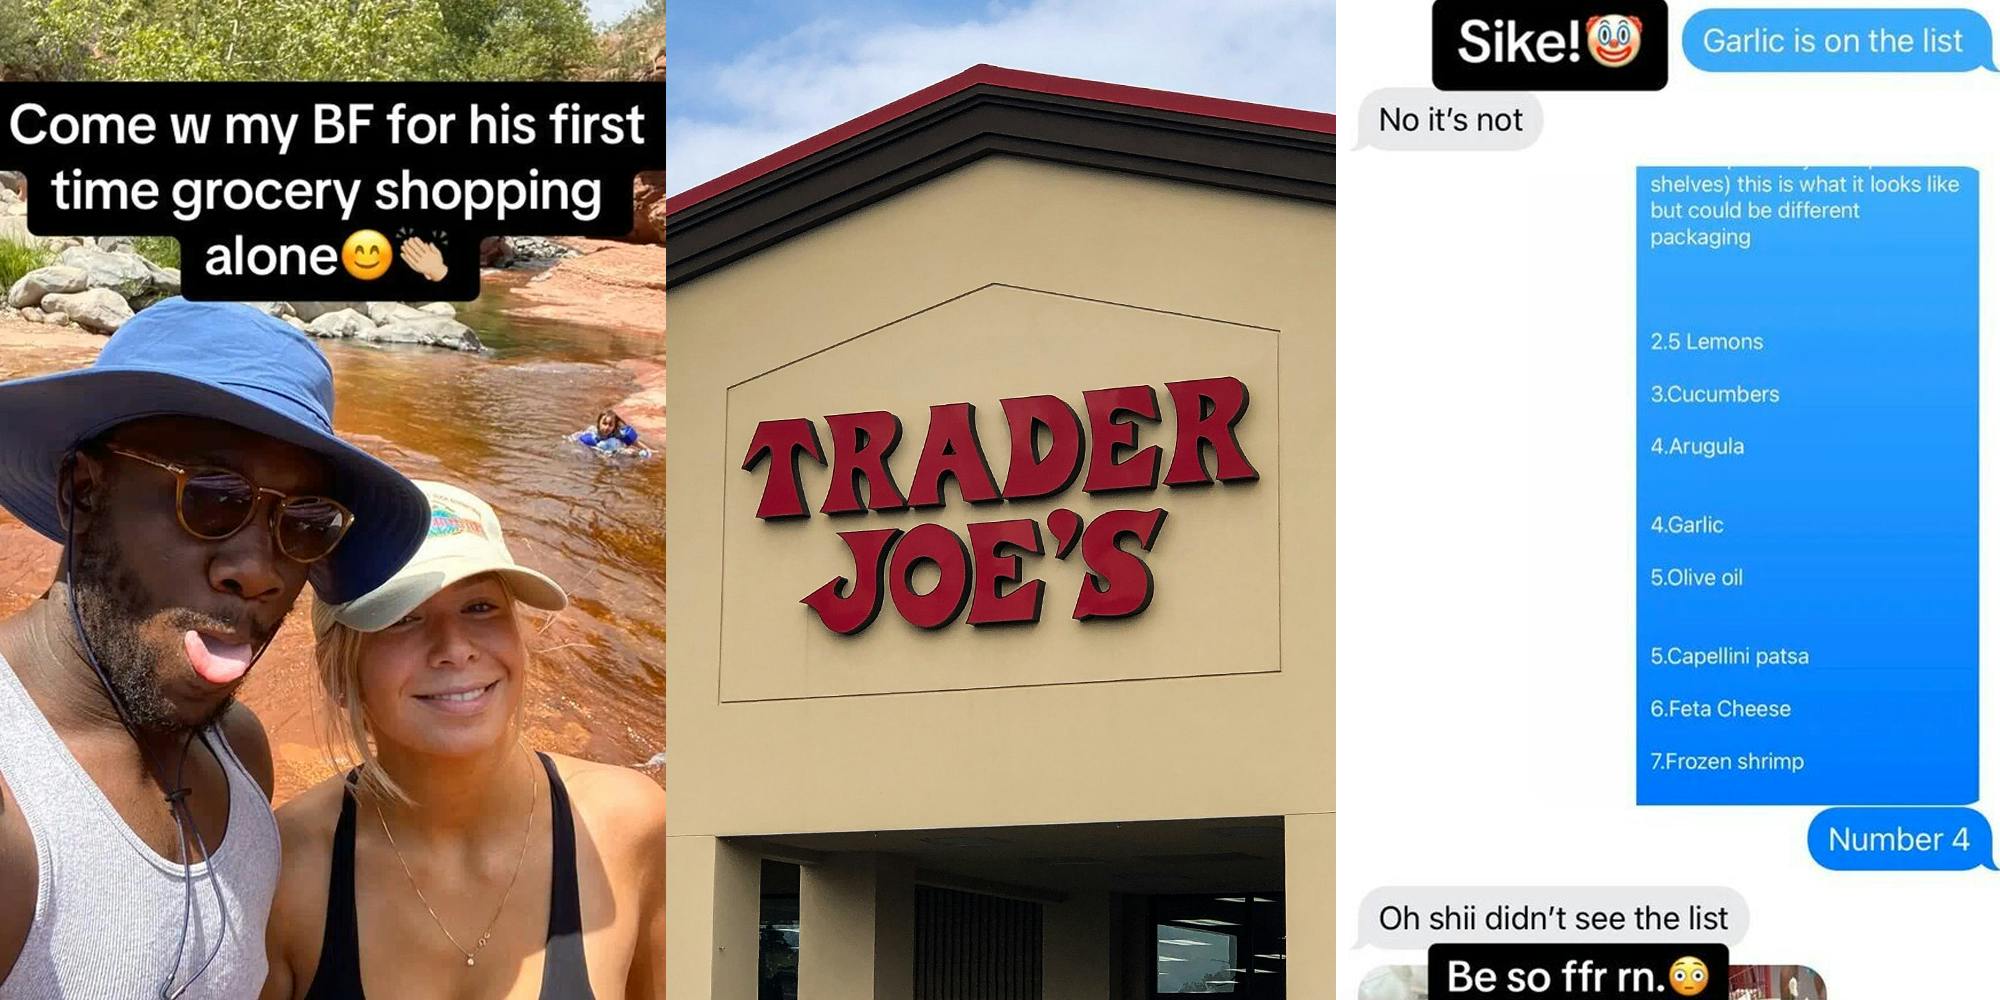 couple outside with caption "Come w my BF for his first time grocery shopping alone" (l) Trader Joe's building with sign (c) shopping list in text message with captions "Sike! Be so ffr rn." (r)